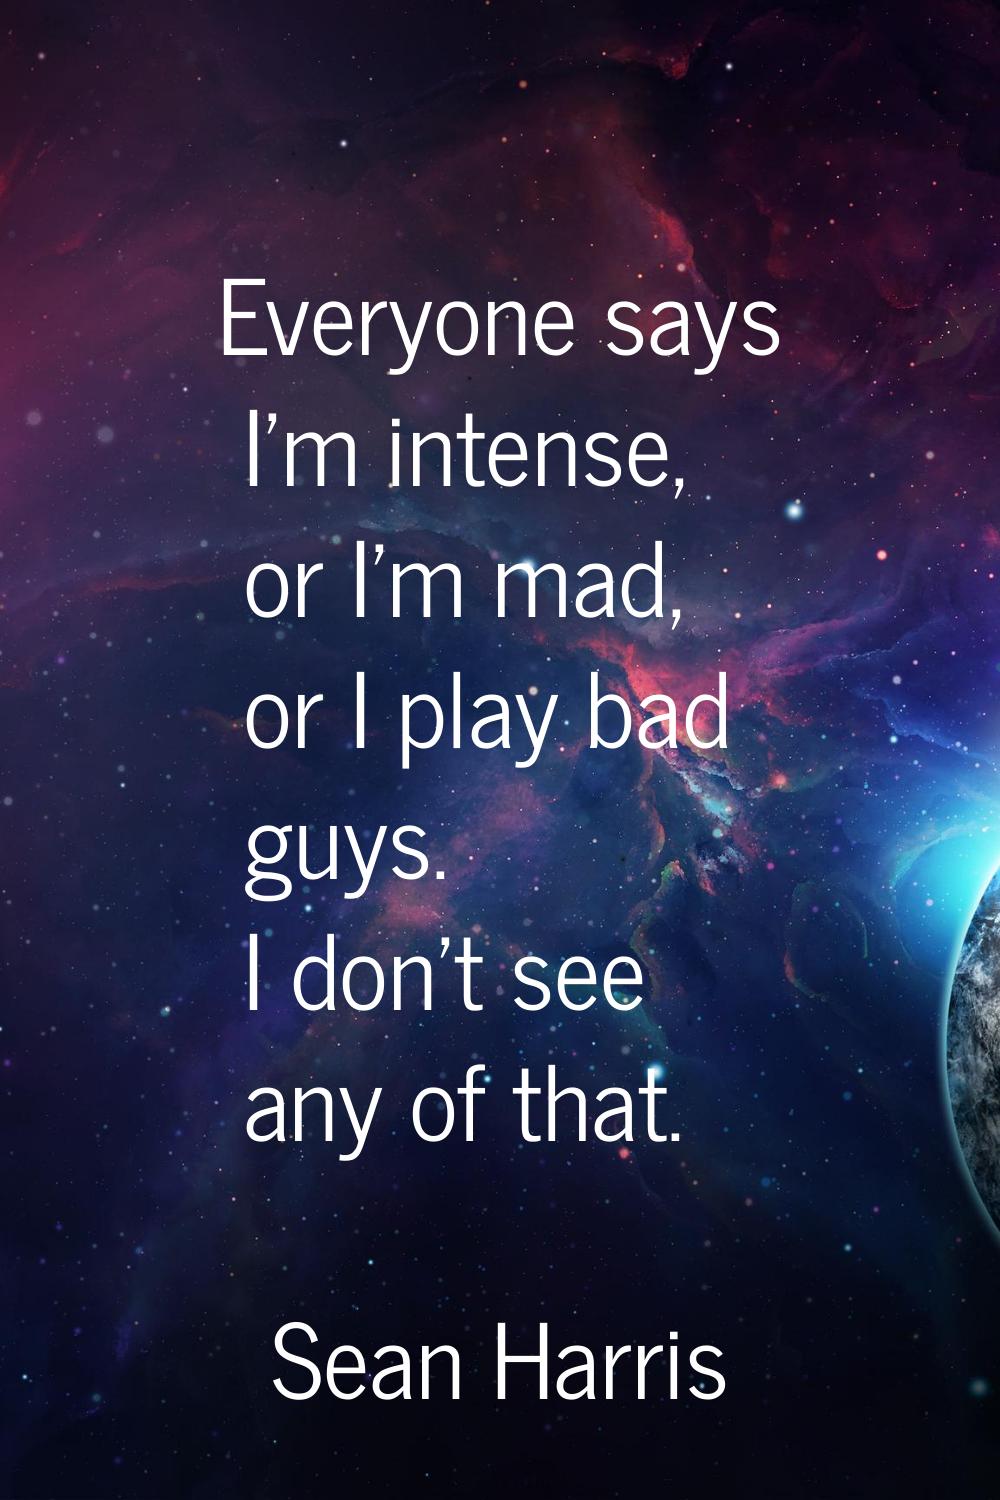 Everyone says I'm intense, or I'm mad, or I play bad guys. I don't see any of that.